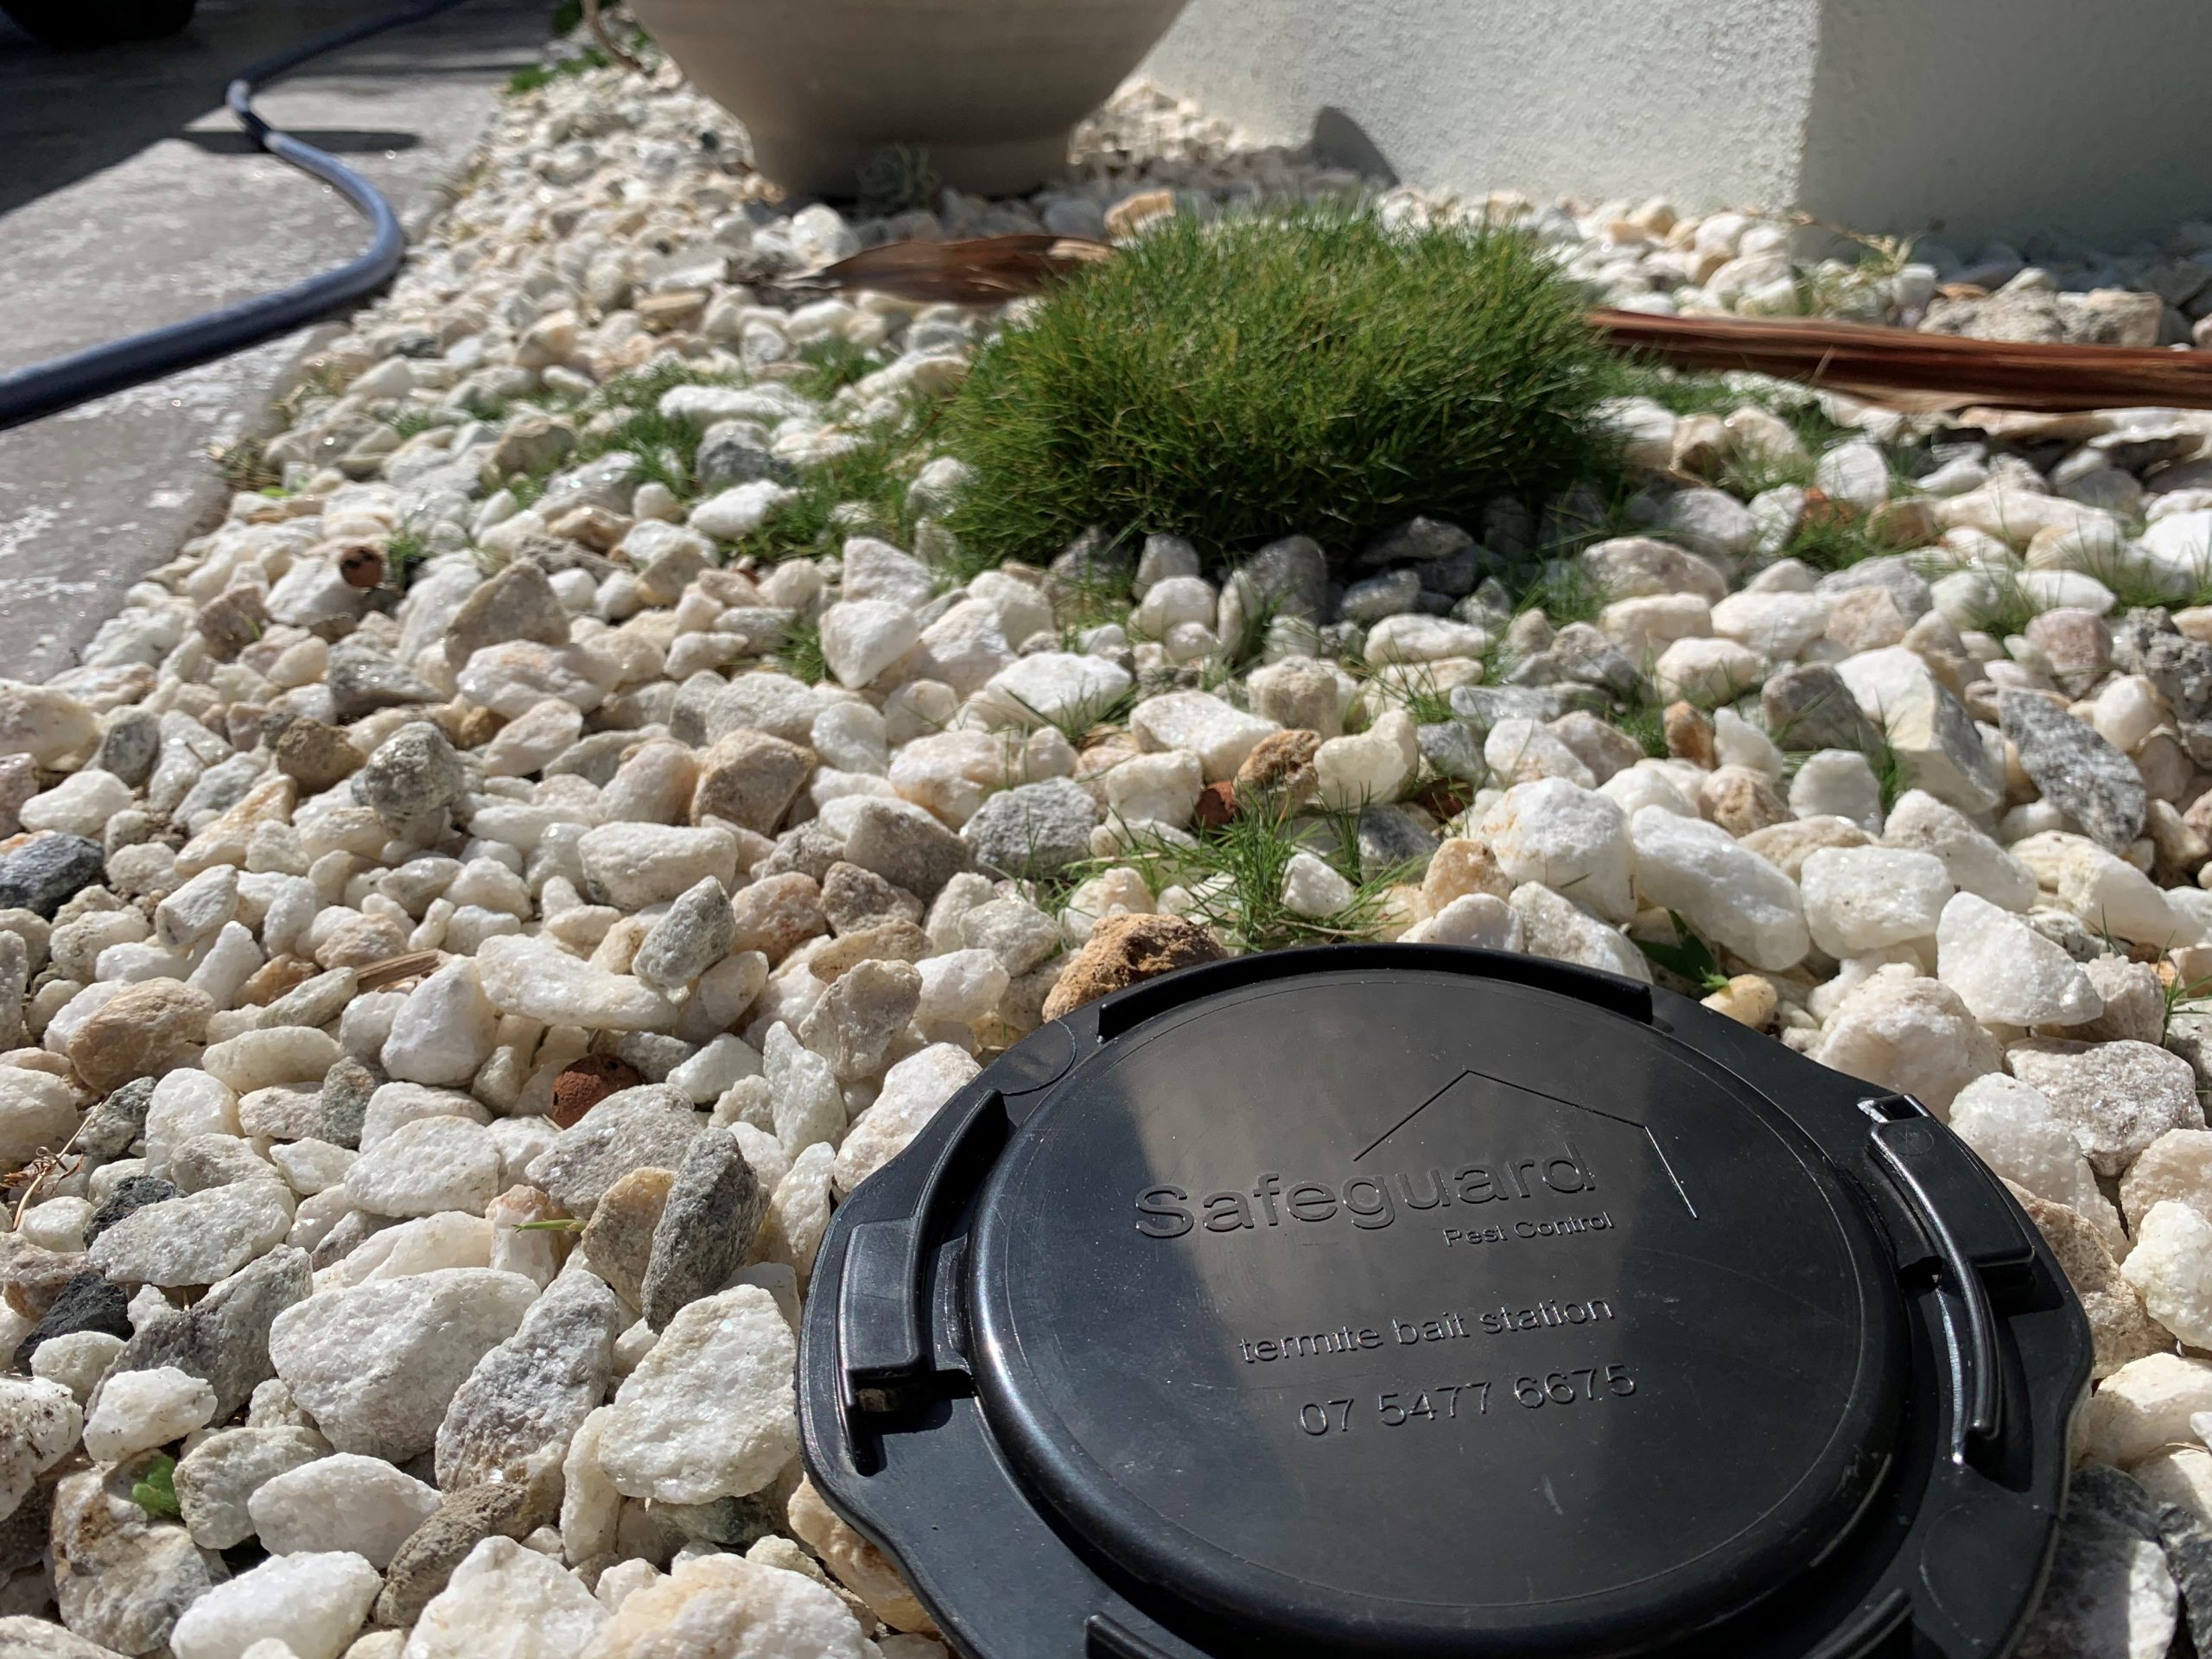 Are Termite Bait Stations an Effective Pest Control Method